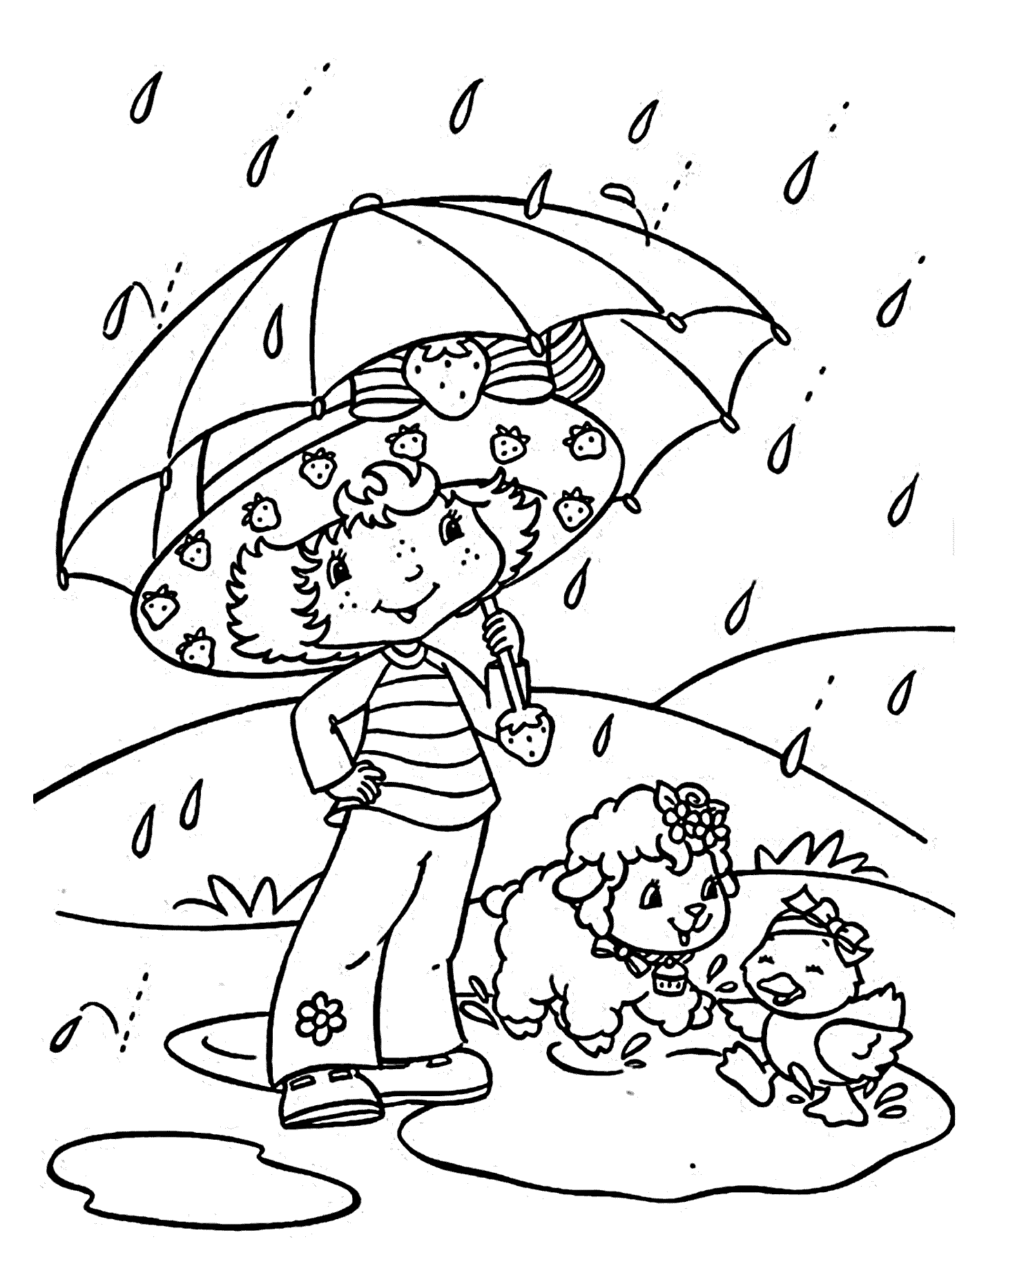 Rainy Day Drawing For Kids at GetDrawings Free download